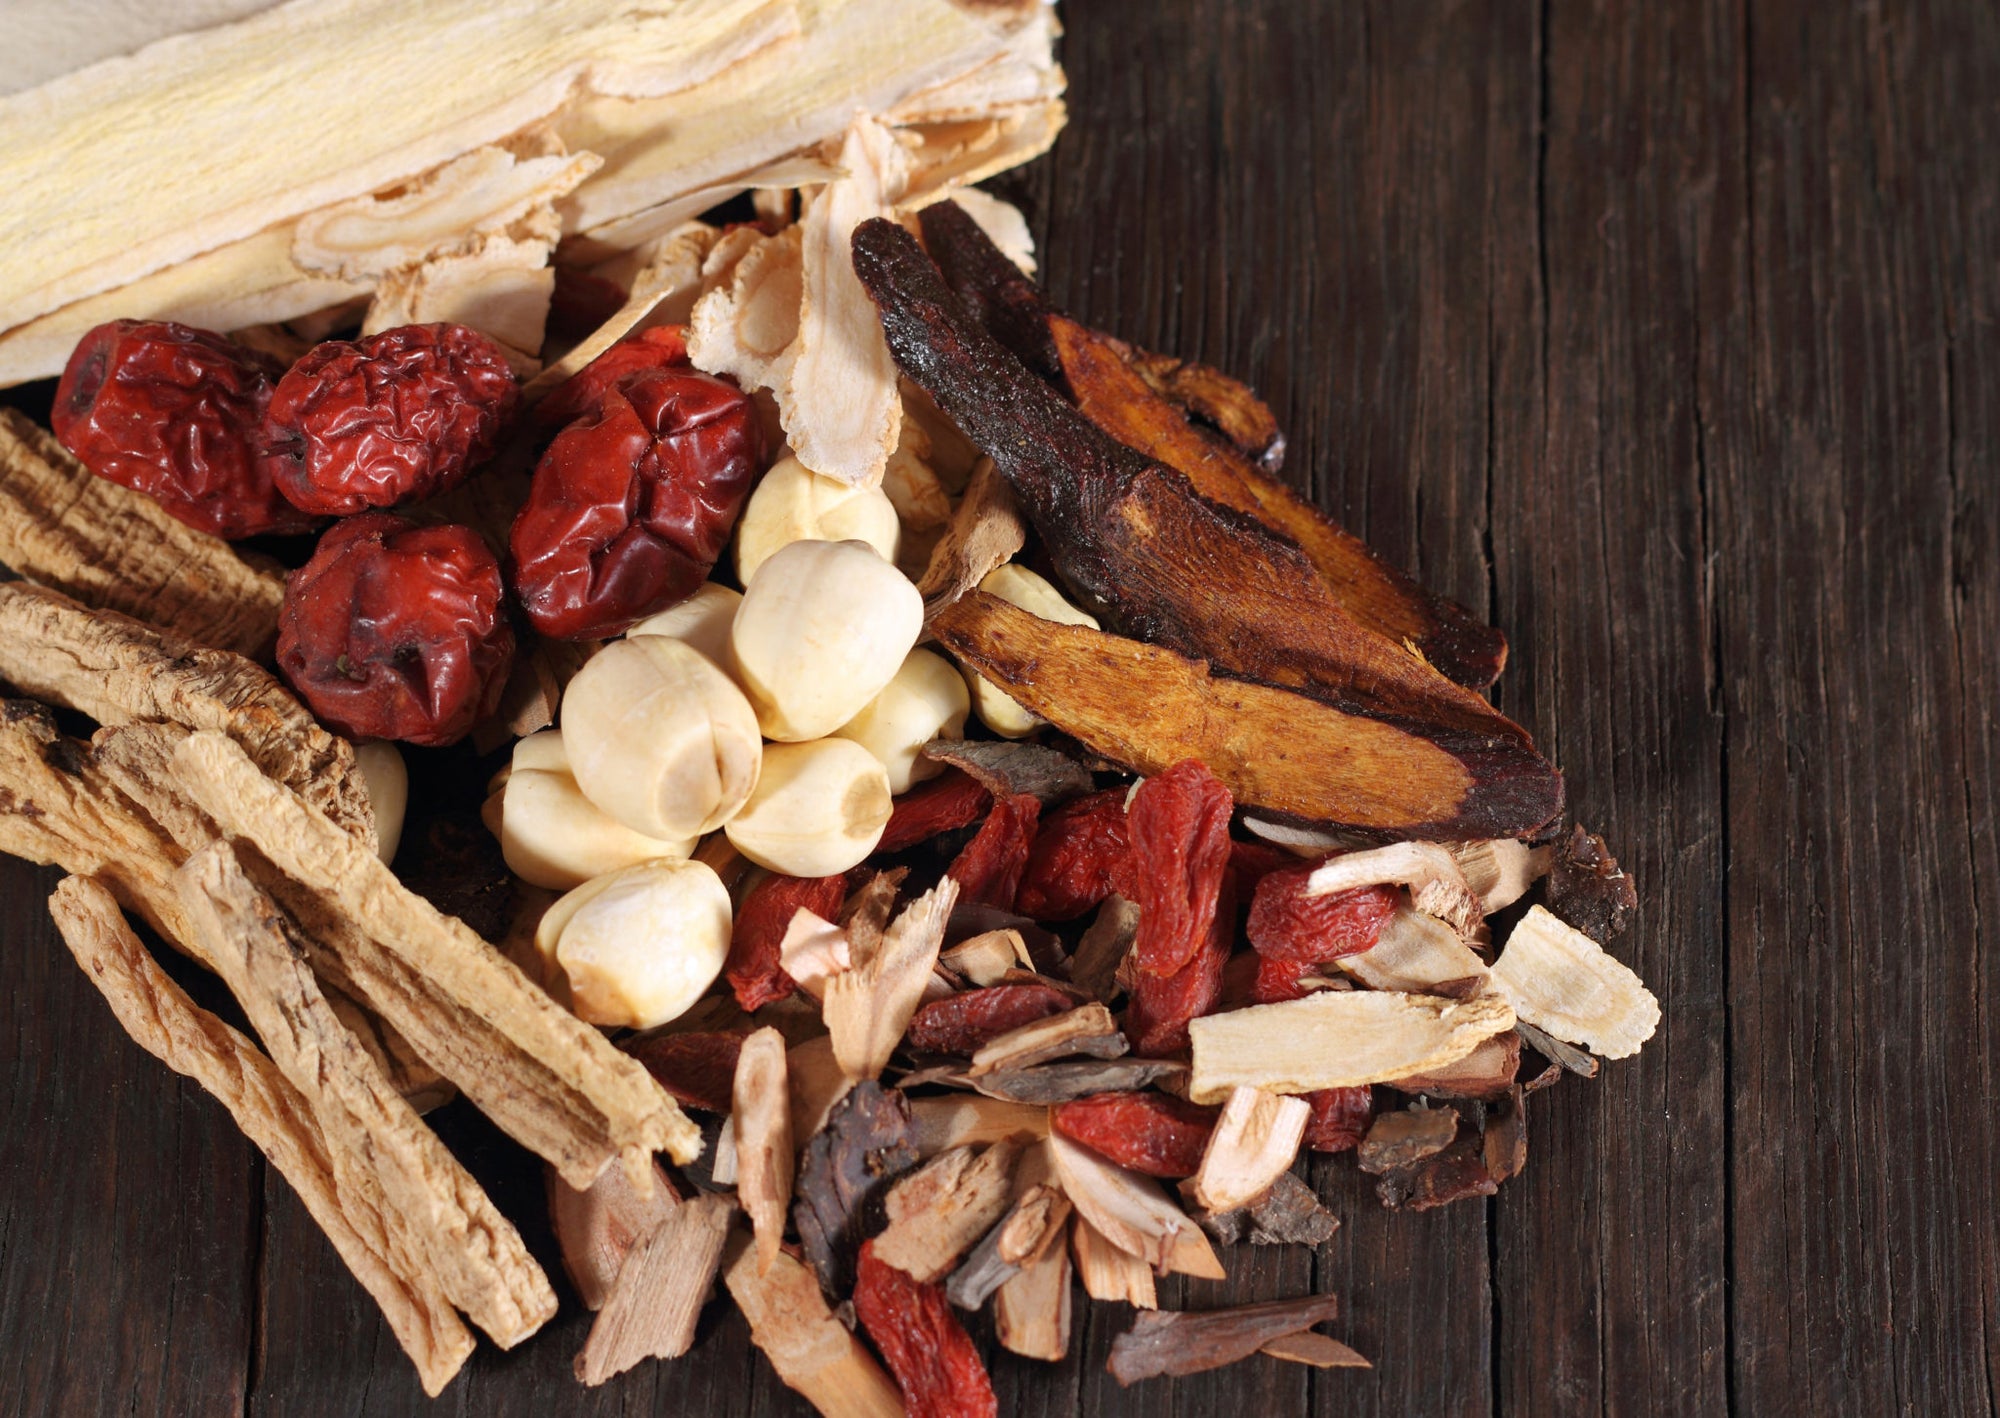 5 Things You Didn't Know About Chinese Medicine.